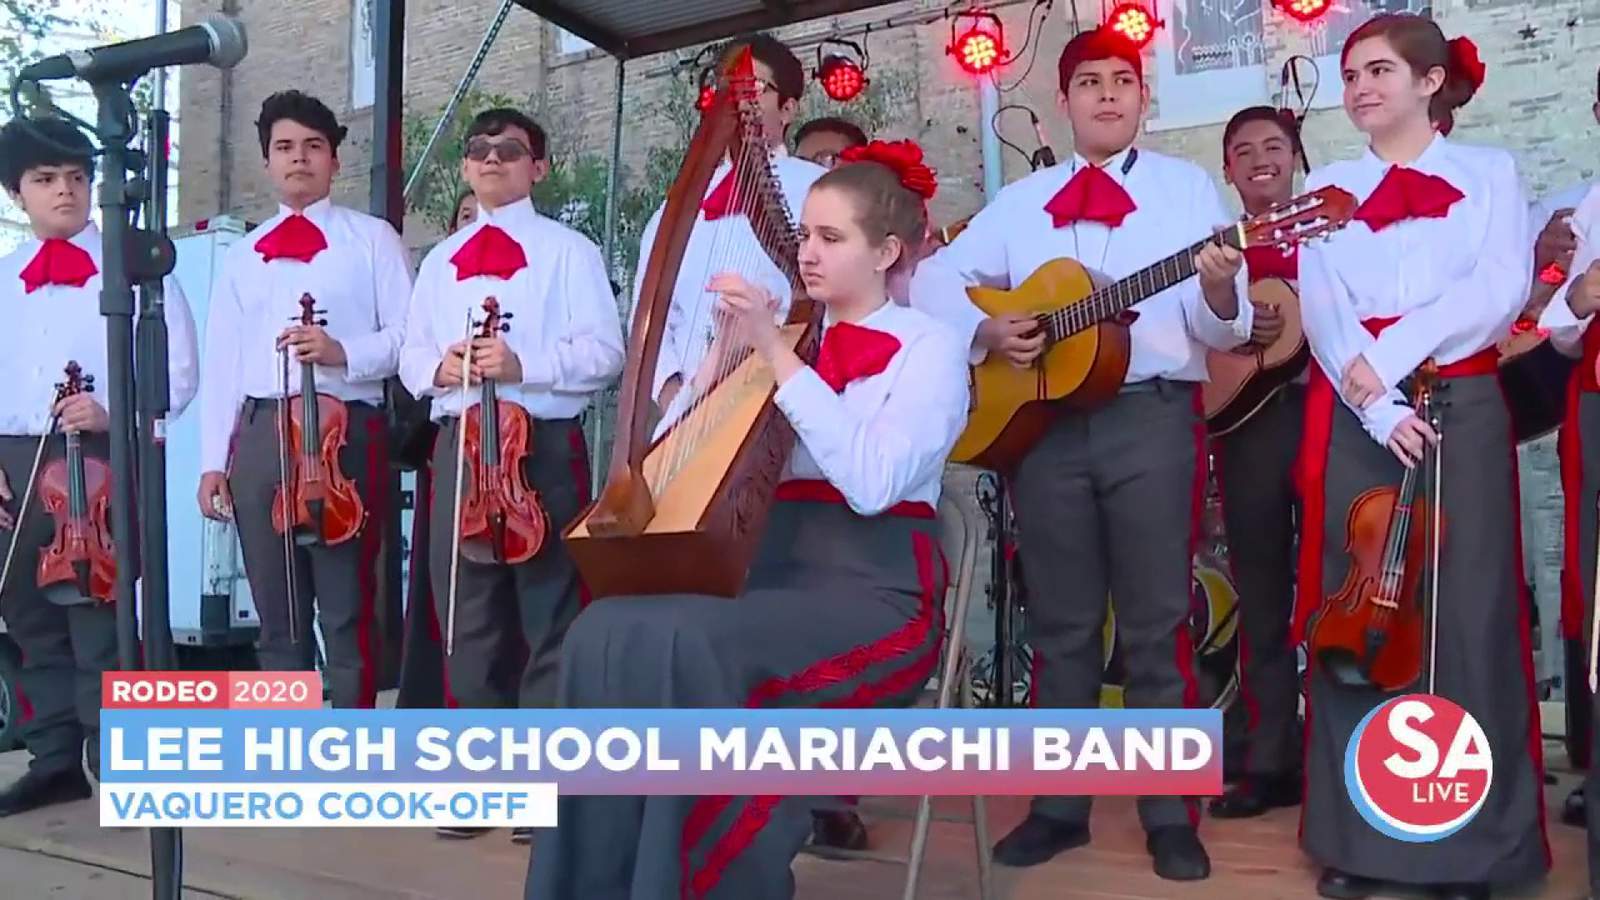 Local high school mariachi band featured at Western Heritage Weekend